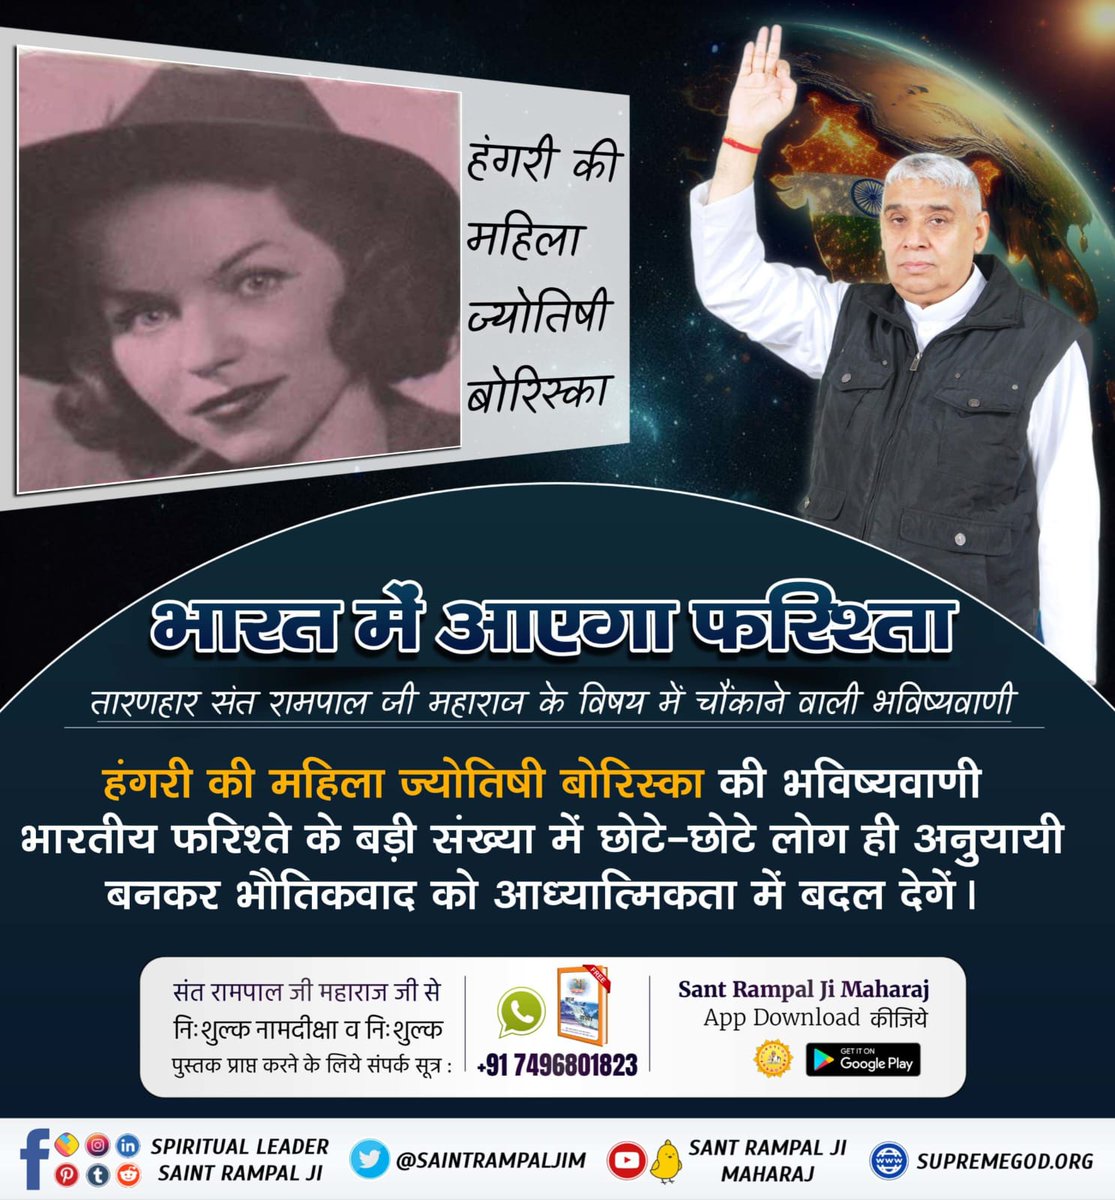 #GodNightWednesday
Angel will come to India
Prediction of Hungarian female astrologer Boriska
A large number of small people will become followers of the Indian angel and will transform materialism into spirituality.
Visit Saint Rampal Ji Maharaj YouTube Channel #wednesdaythought